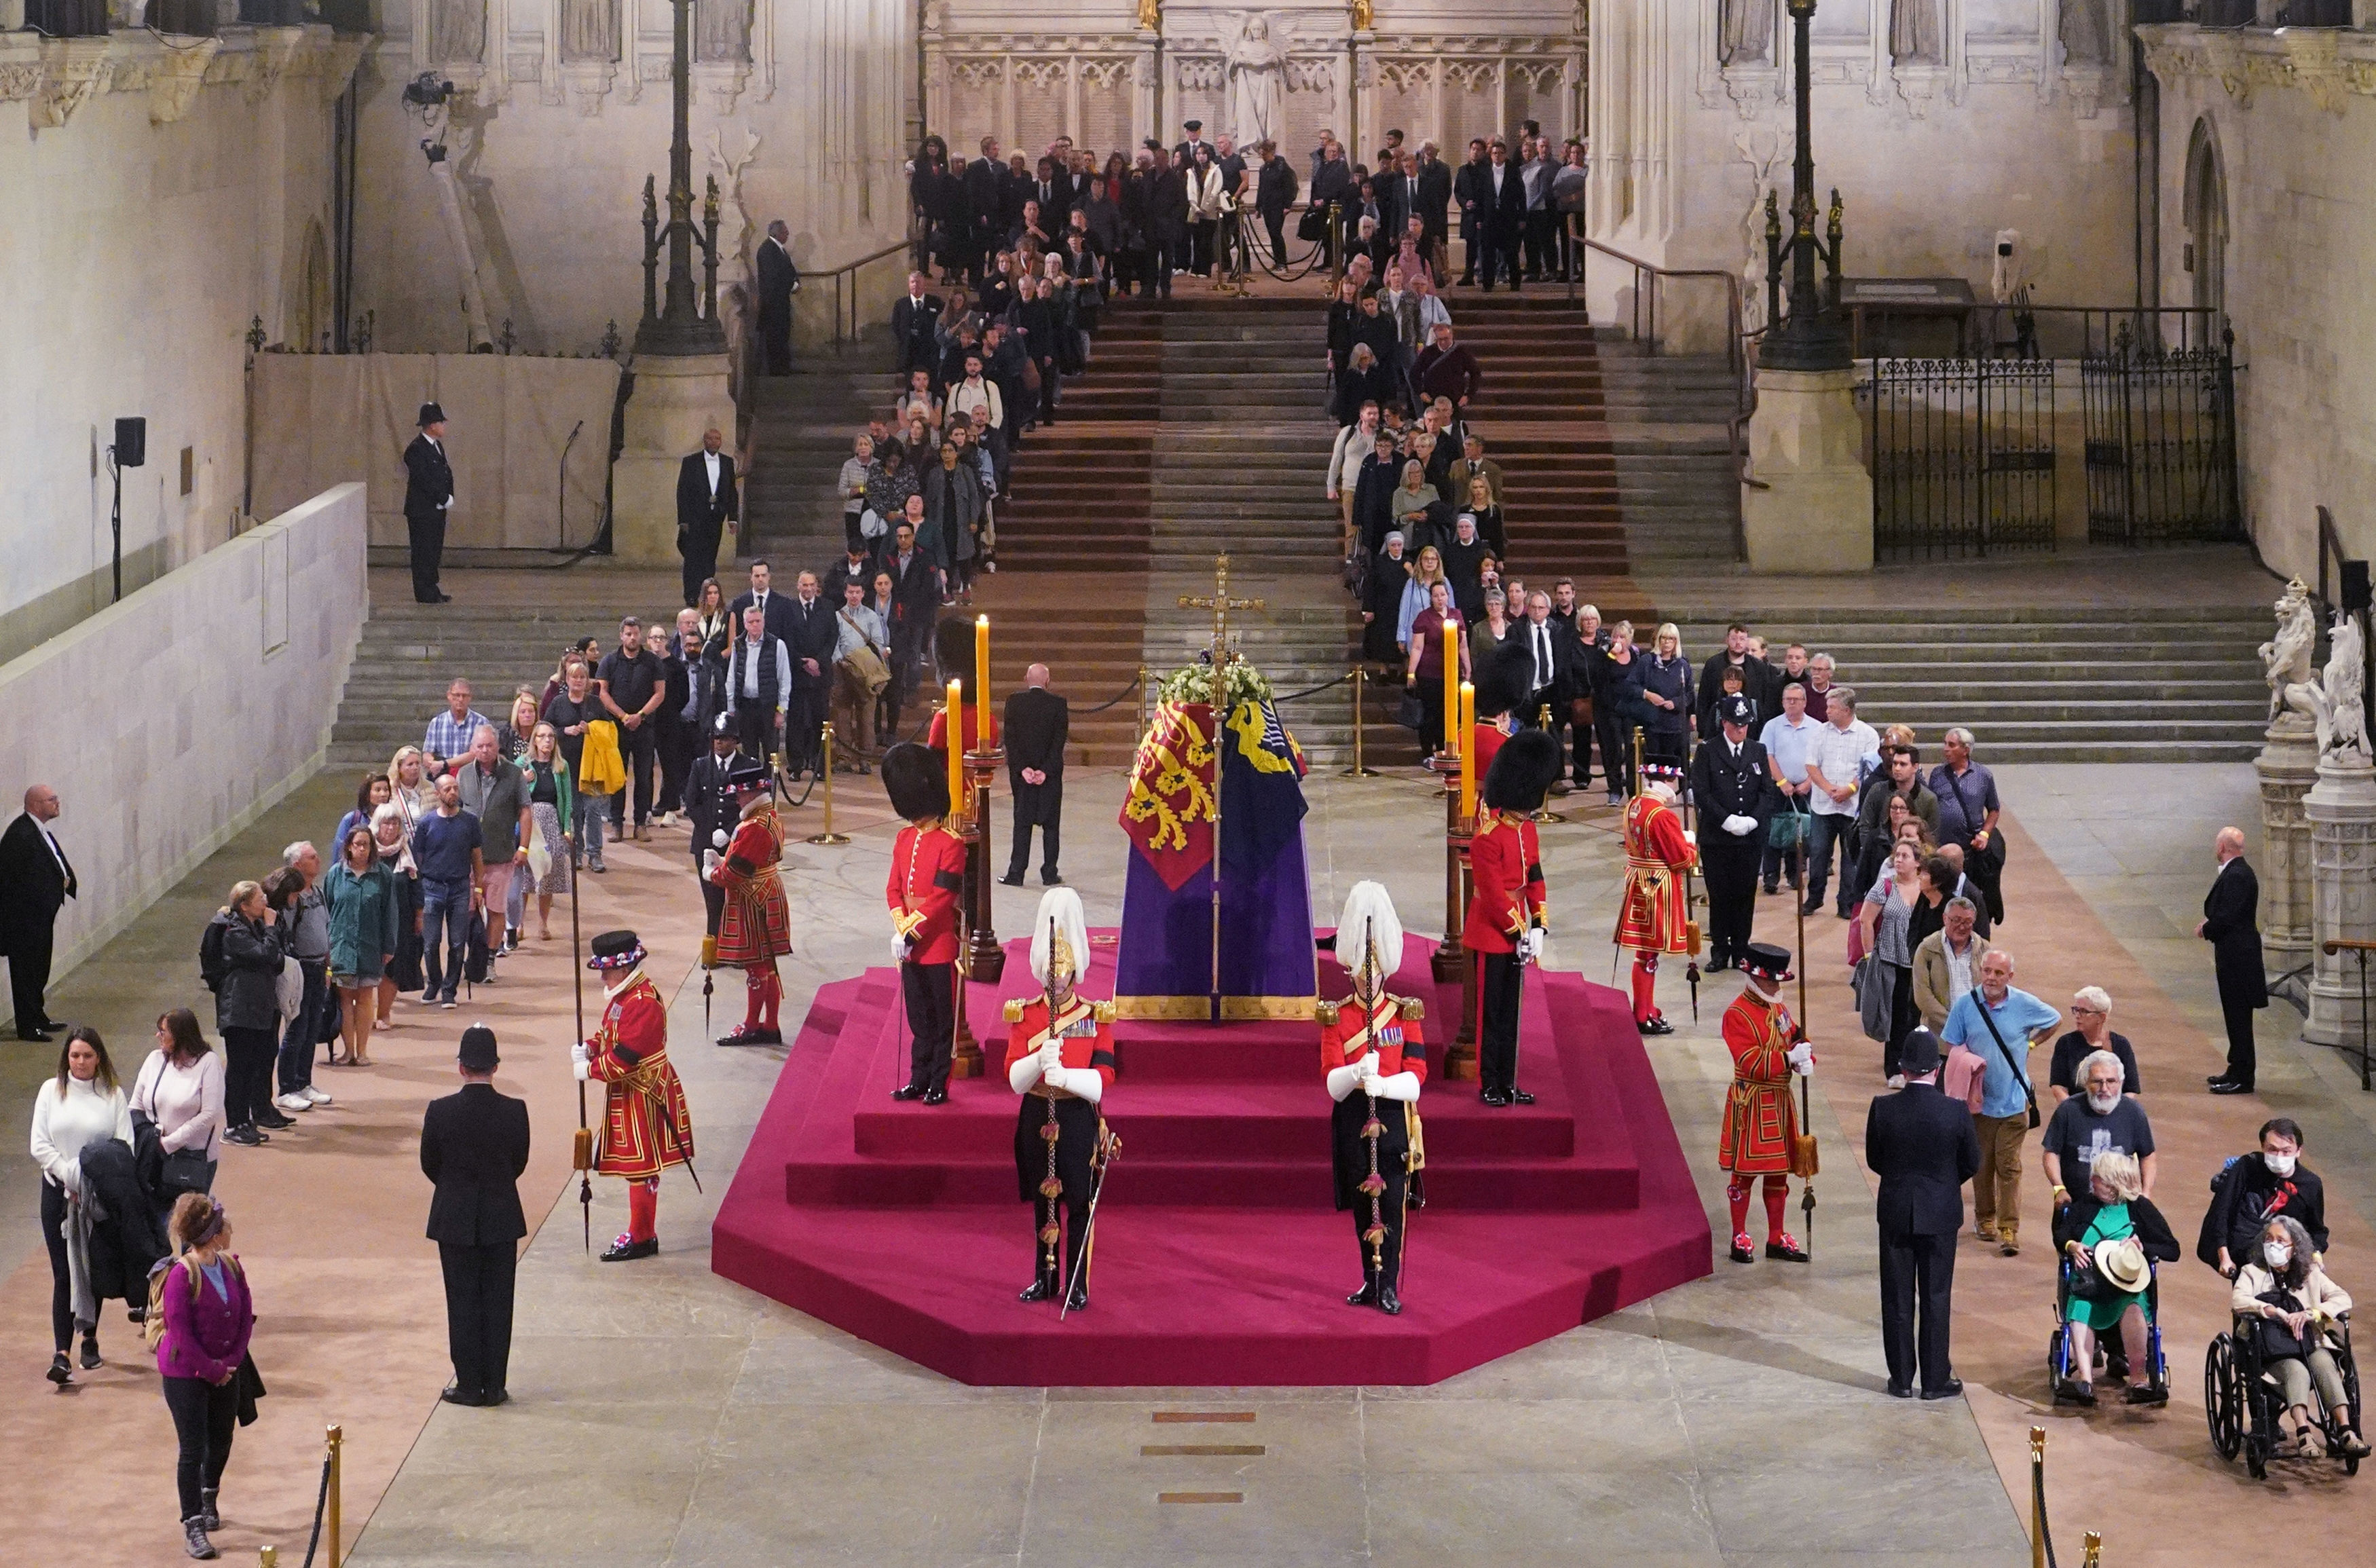 Eight soldiers in gala uniforms carried the coffin of the monarch who died last Thursday at the age of 96, to a purple catafalque inside Westminster Hall, the oldest part of the building which houses the British Parliament .